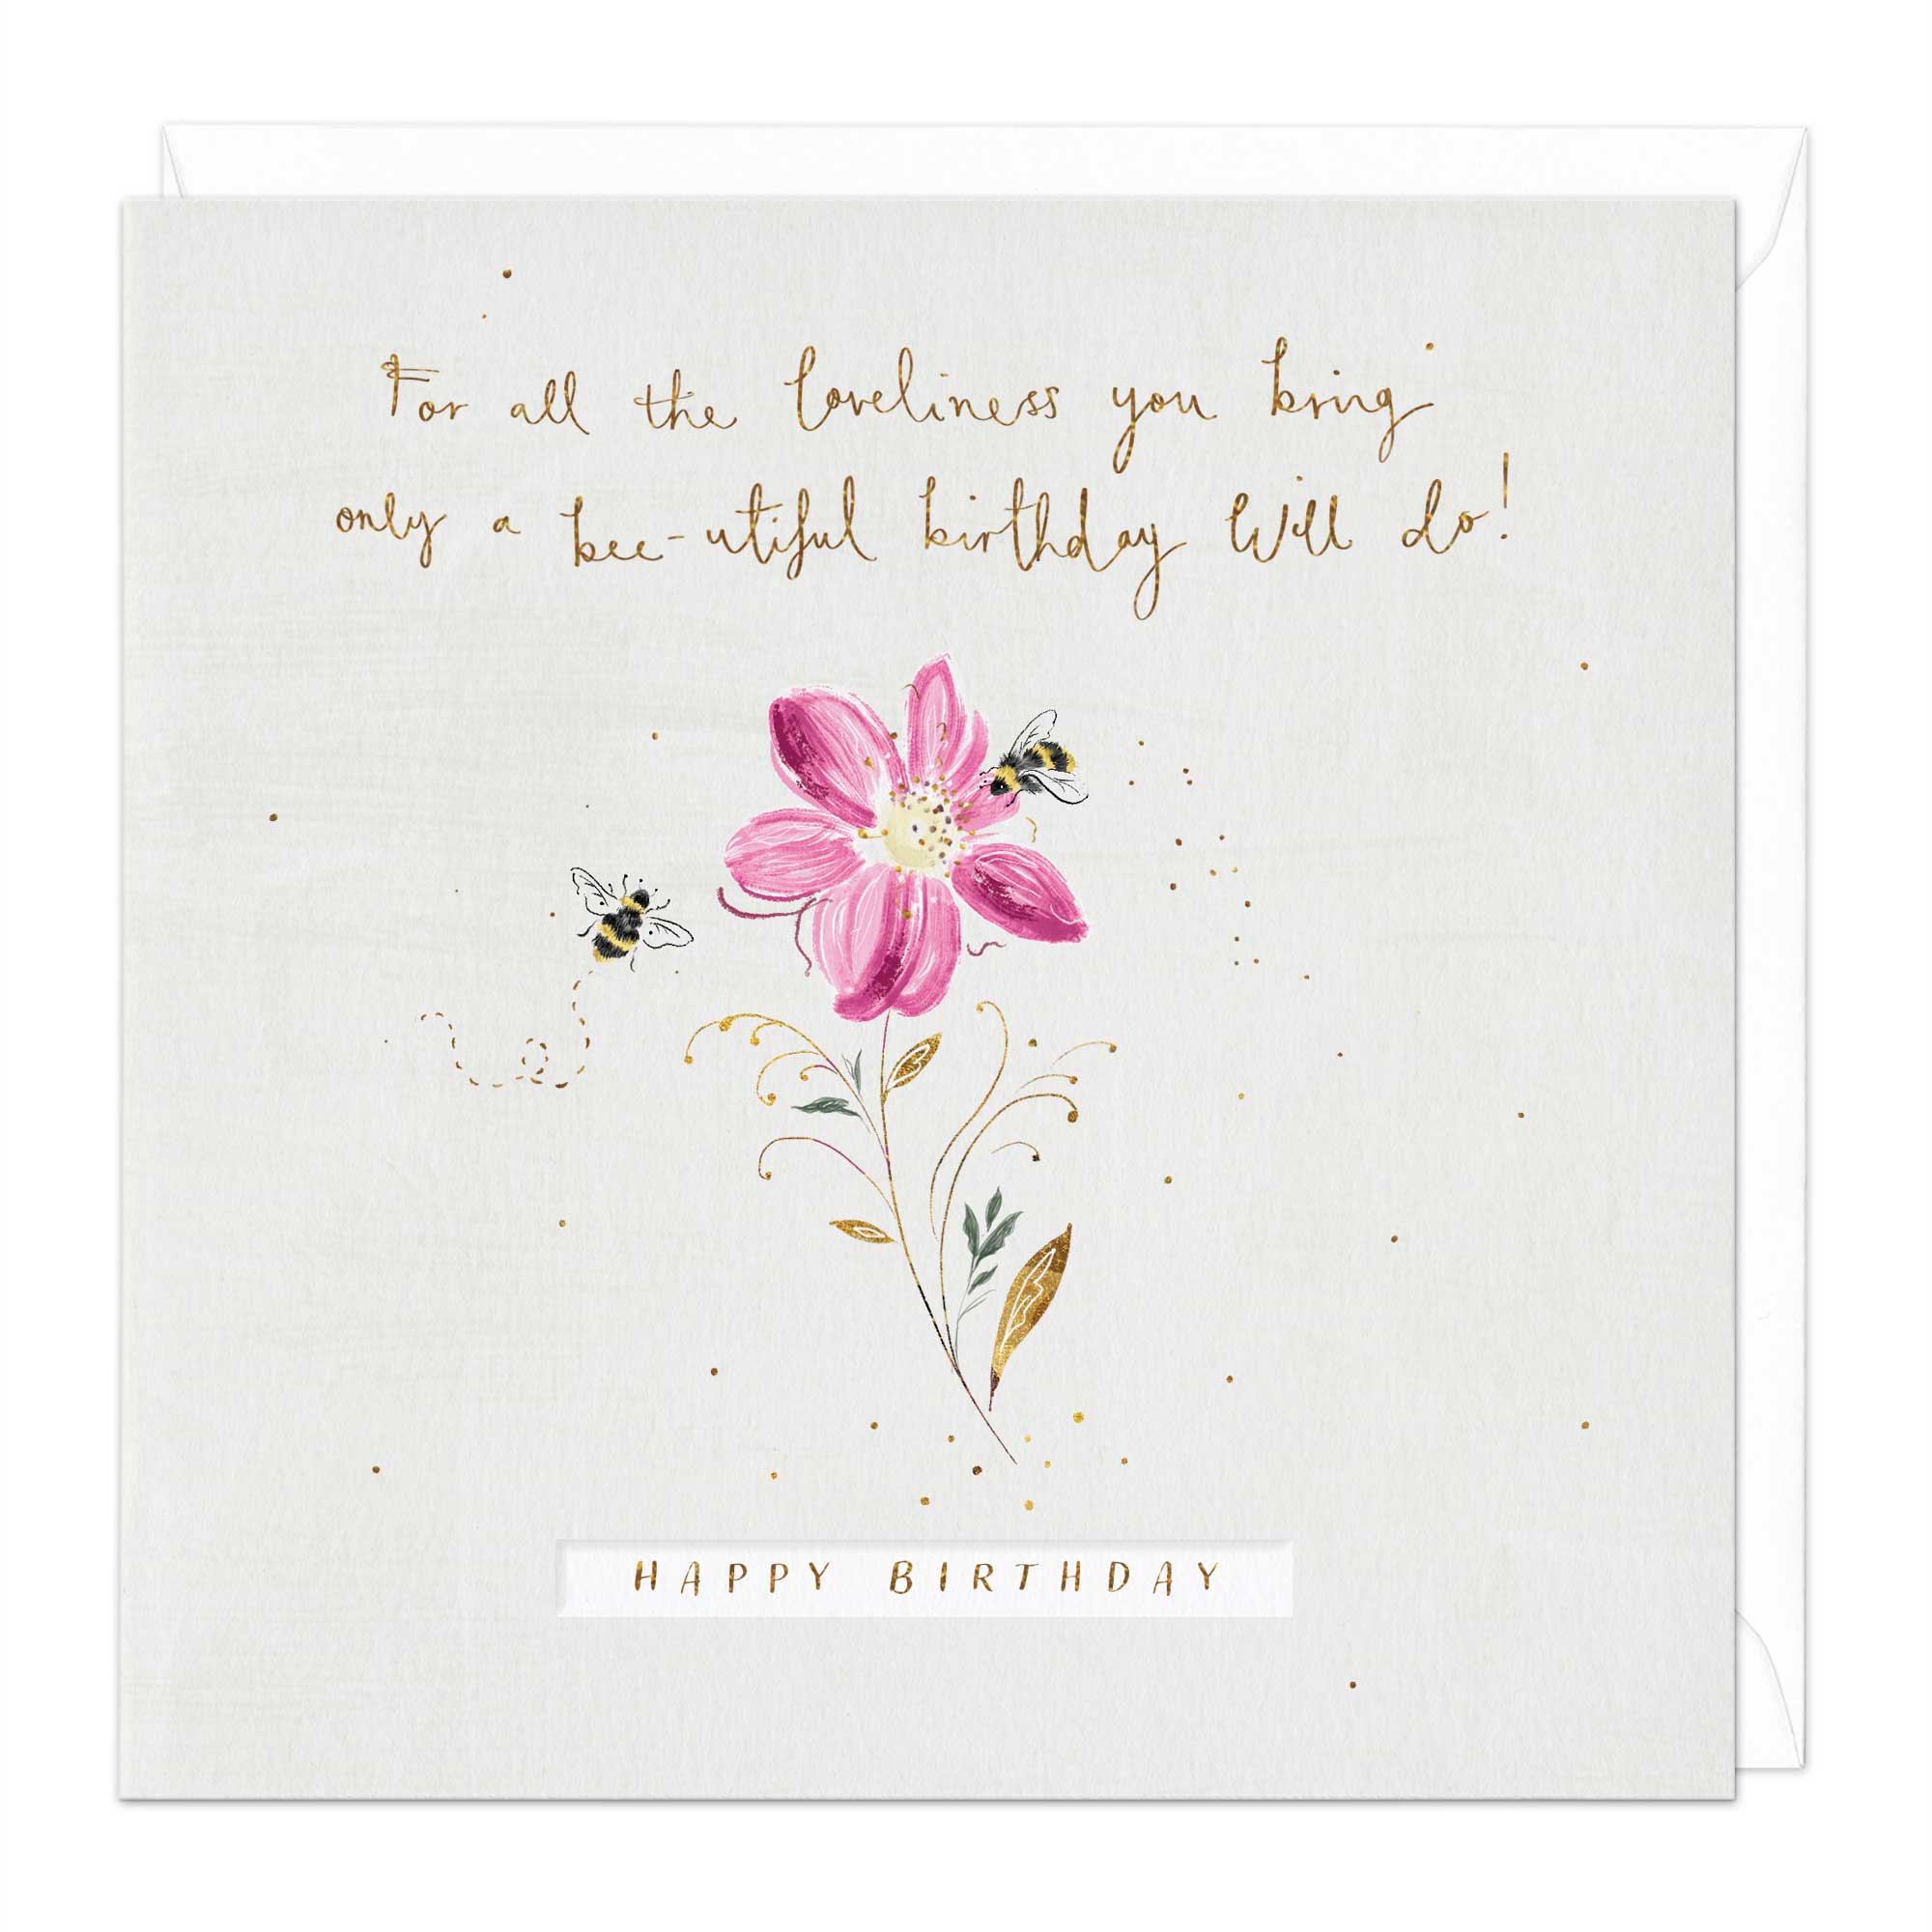 Bees On A Flower Birthday Card